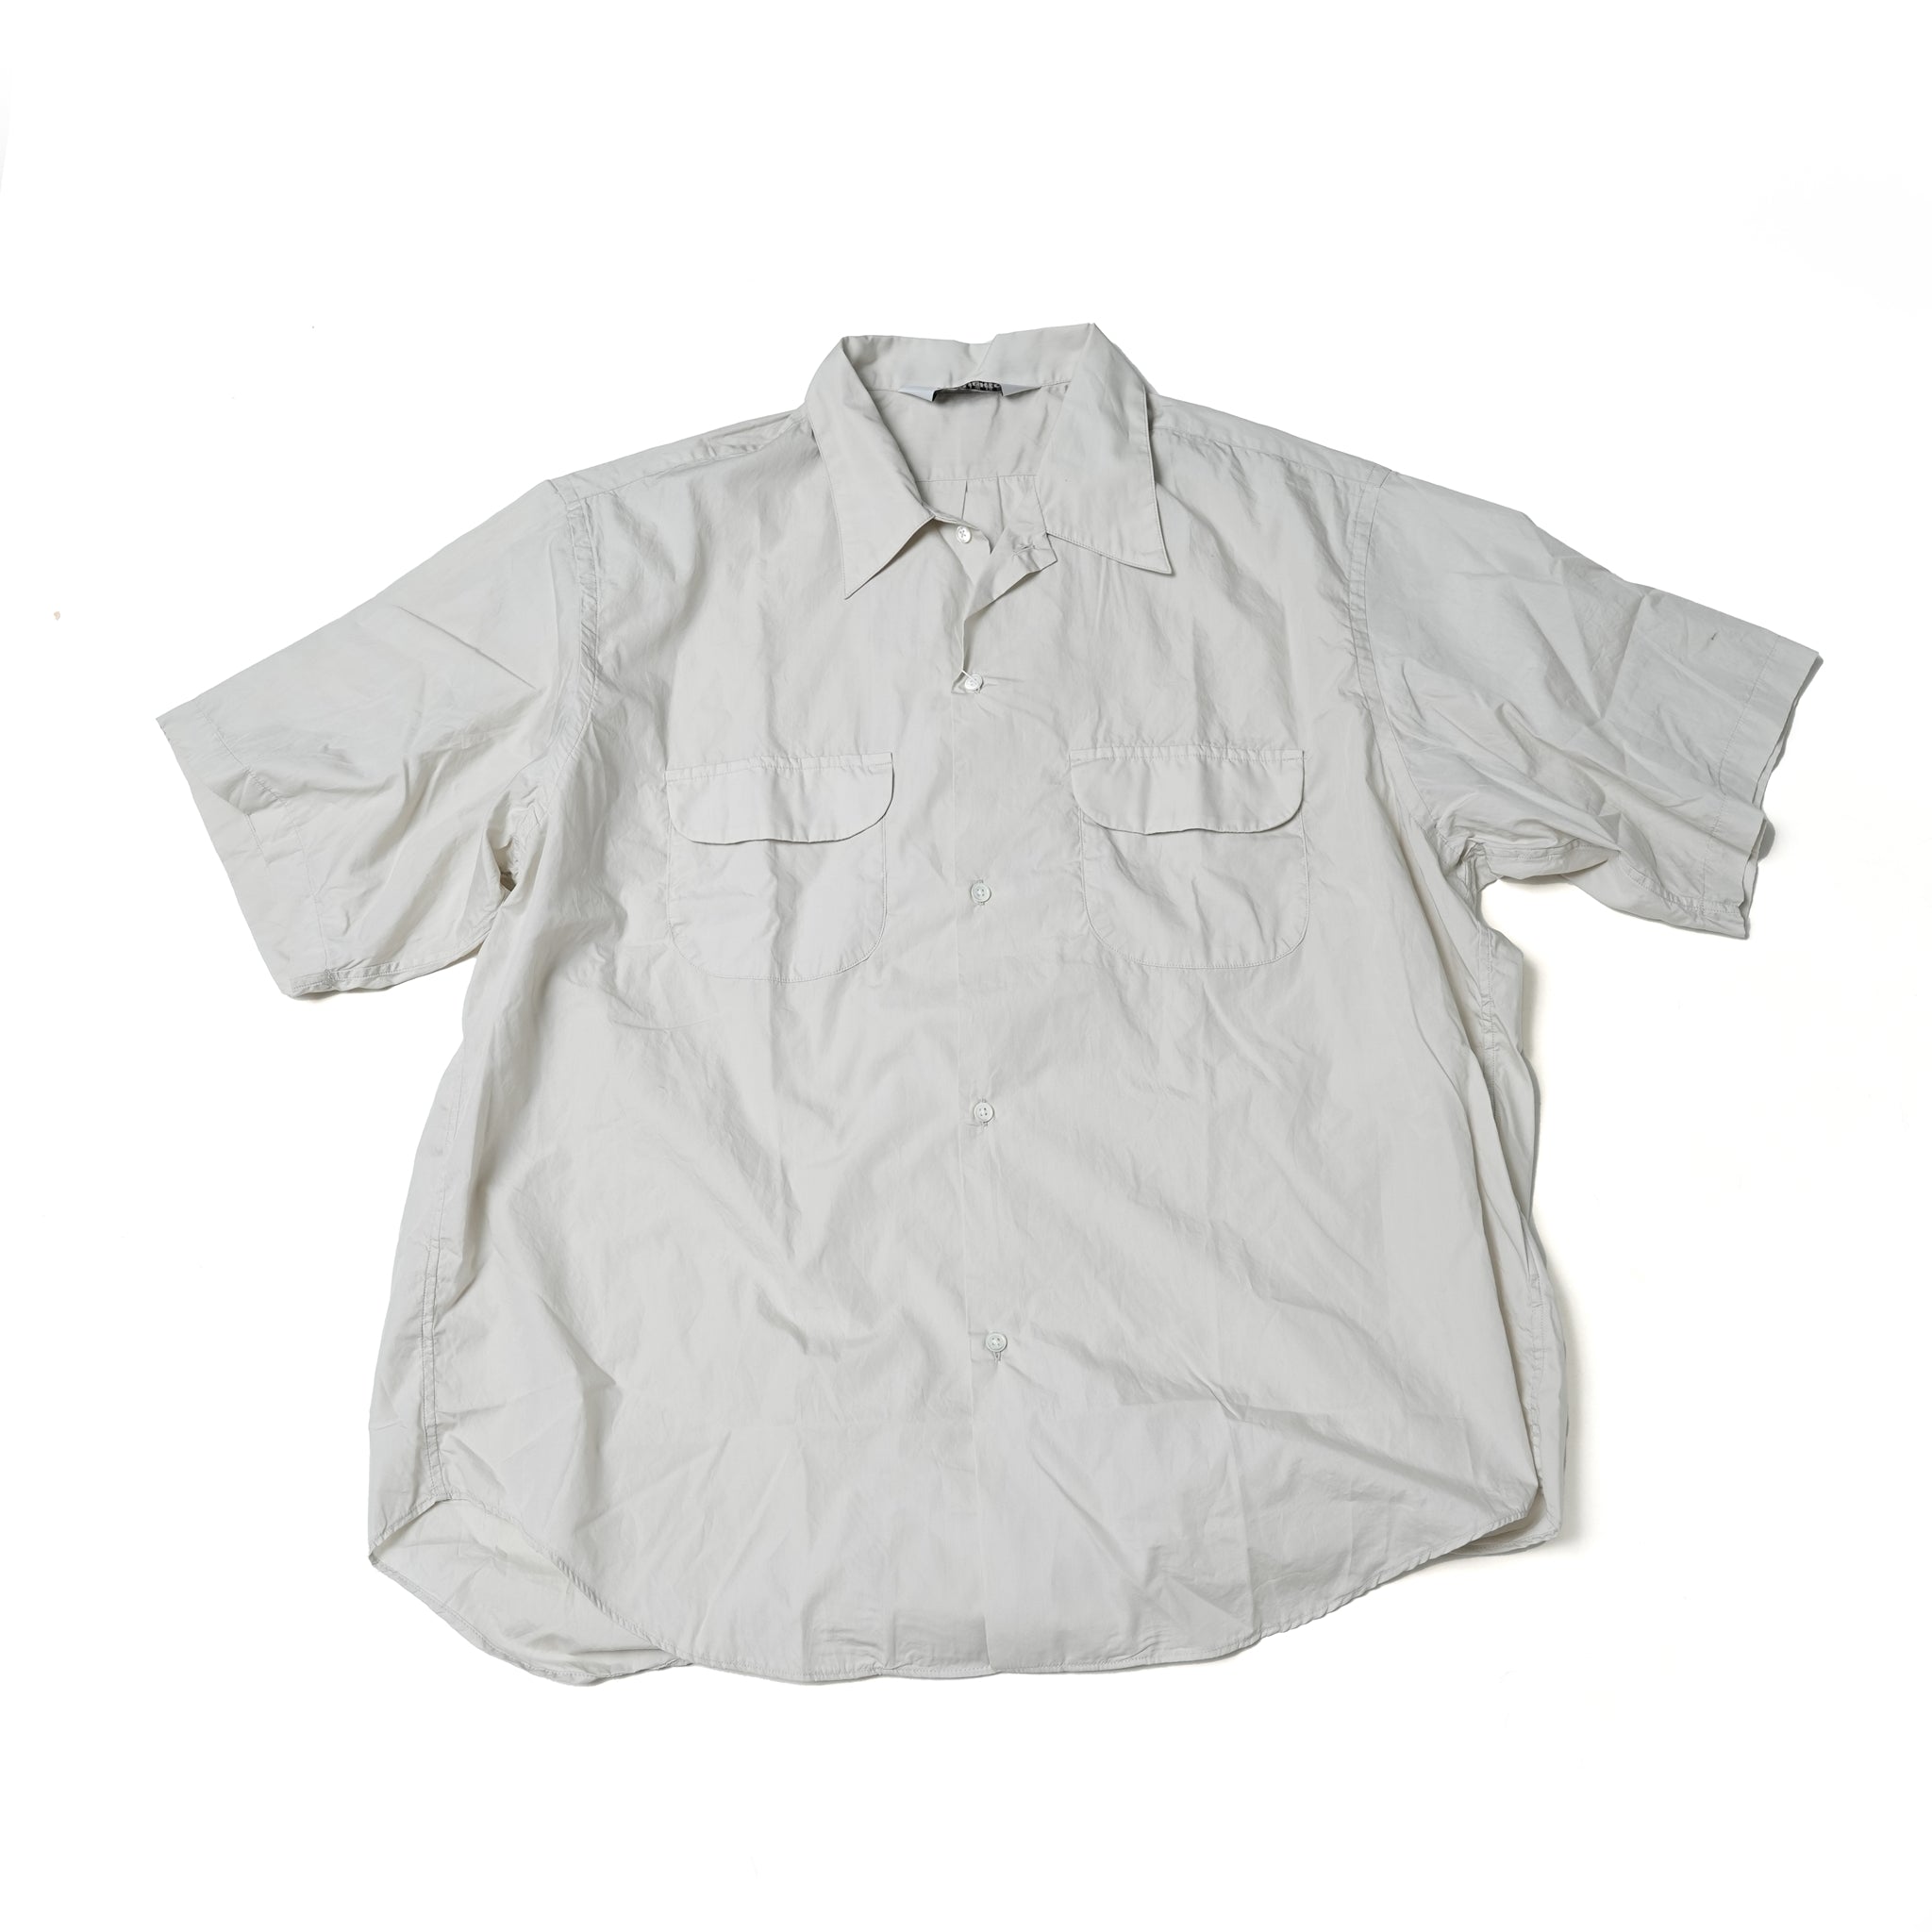 Name: FLAT COLLAR SS SHIRT *L.BEIGE 【CITYLIGHTS PRODUCTS_シティライツプロダクツ】